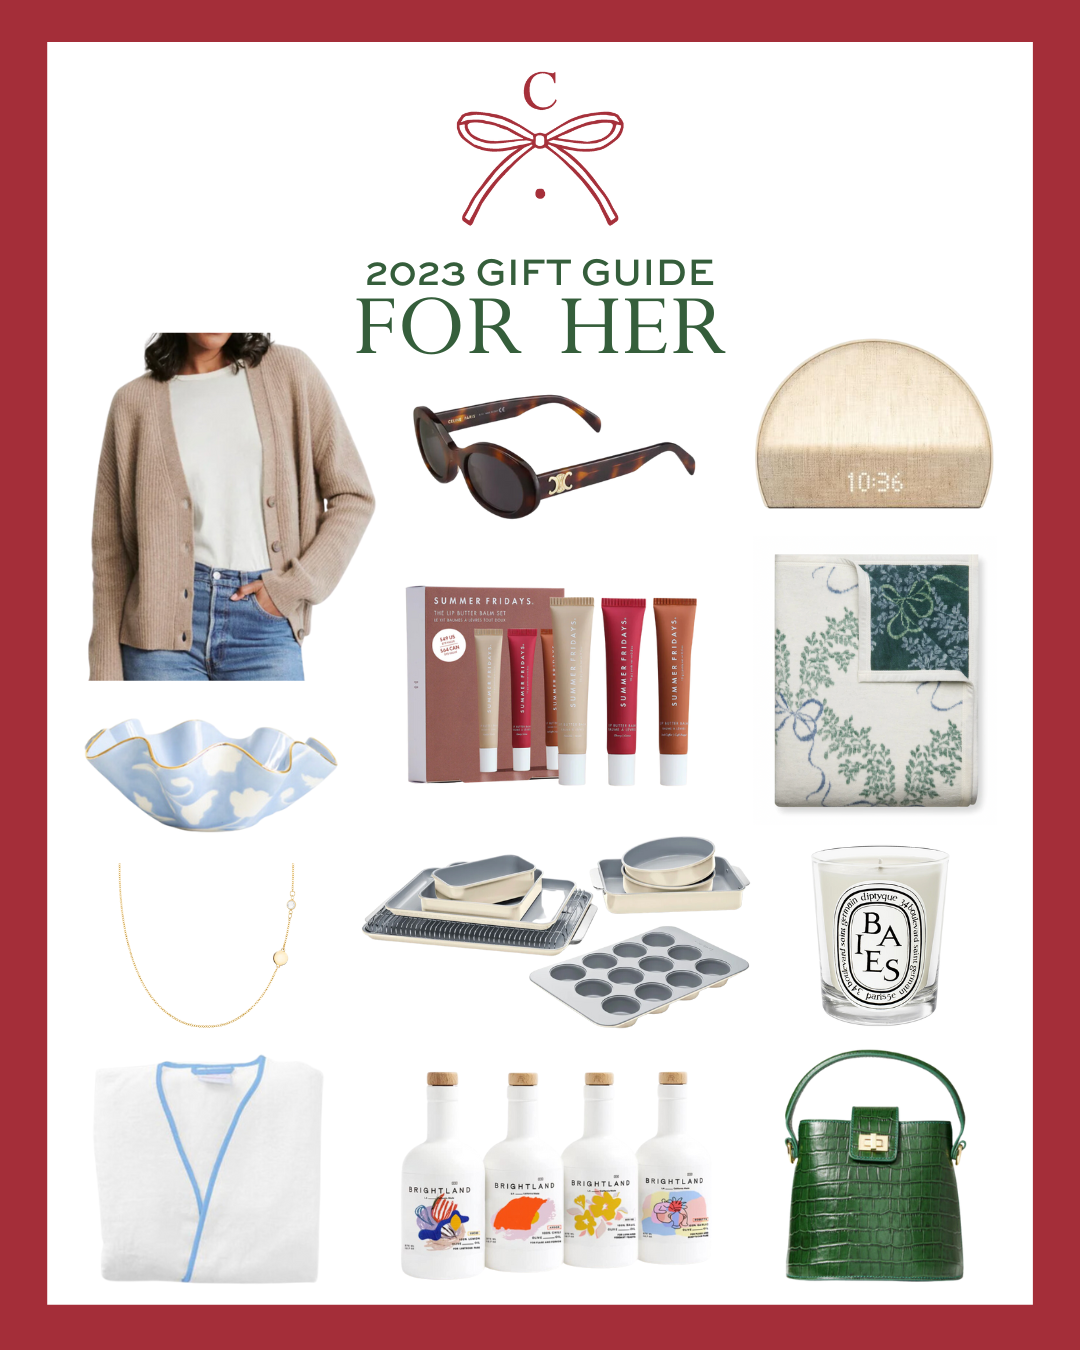 2023 Christmas gift guide for her including the Jenni Kayne Cropped Cashmere Cocoon Cardigan, Celine Triomphe 52MM Oval Sunglasses, Hatch Restore 2 Sunrise Alarm Clock, Susan Gordon Pottery Bijou Poppy Wavy Bowl, Summer Fridays Lip Butter Balm Set, ChappyWrap Blanket, Haverhill Classic 1 Letter & 1 Birthstone Necklace, Caraway Bakeware Set, Diptyque Baies Scented Candle, Weezie Women’s Short Signature Robe, Brightland The Artist Capsule Cold-Pressed Olive Oils, and Neely & Chloe Structured Bucket Bag 